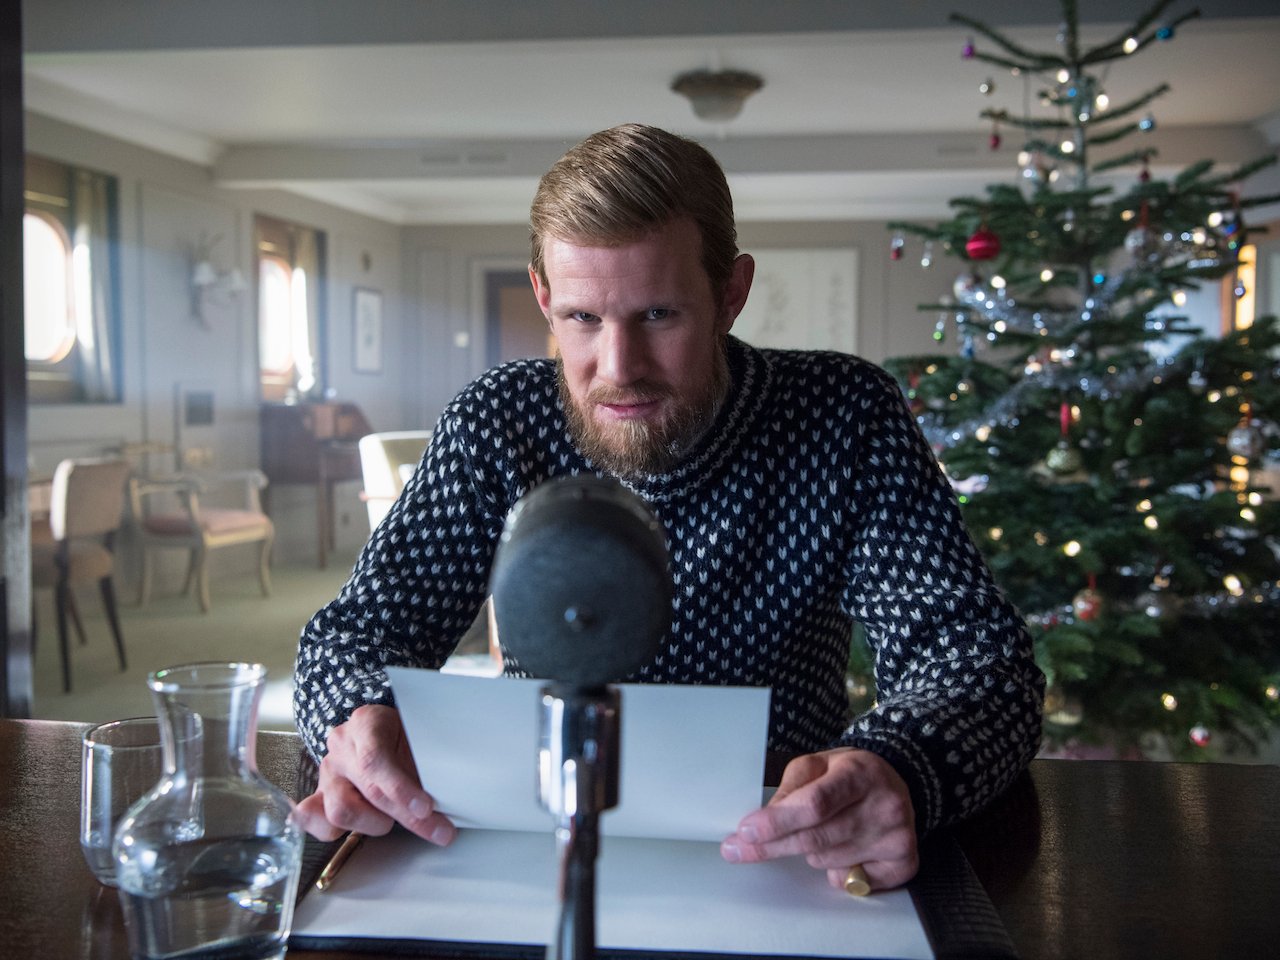  The Crown season 2 royals- still of Philip as he prepares to deliver his Christmas address over the radio